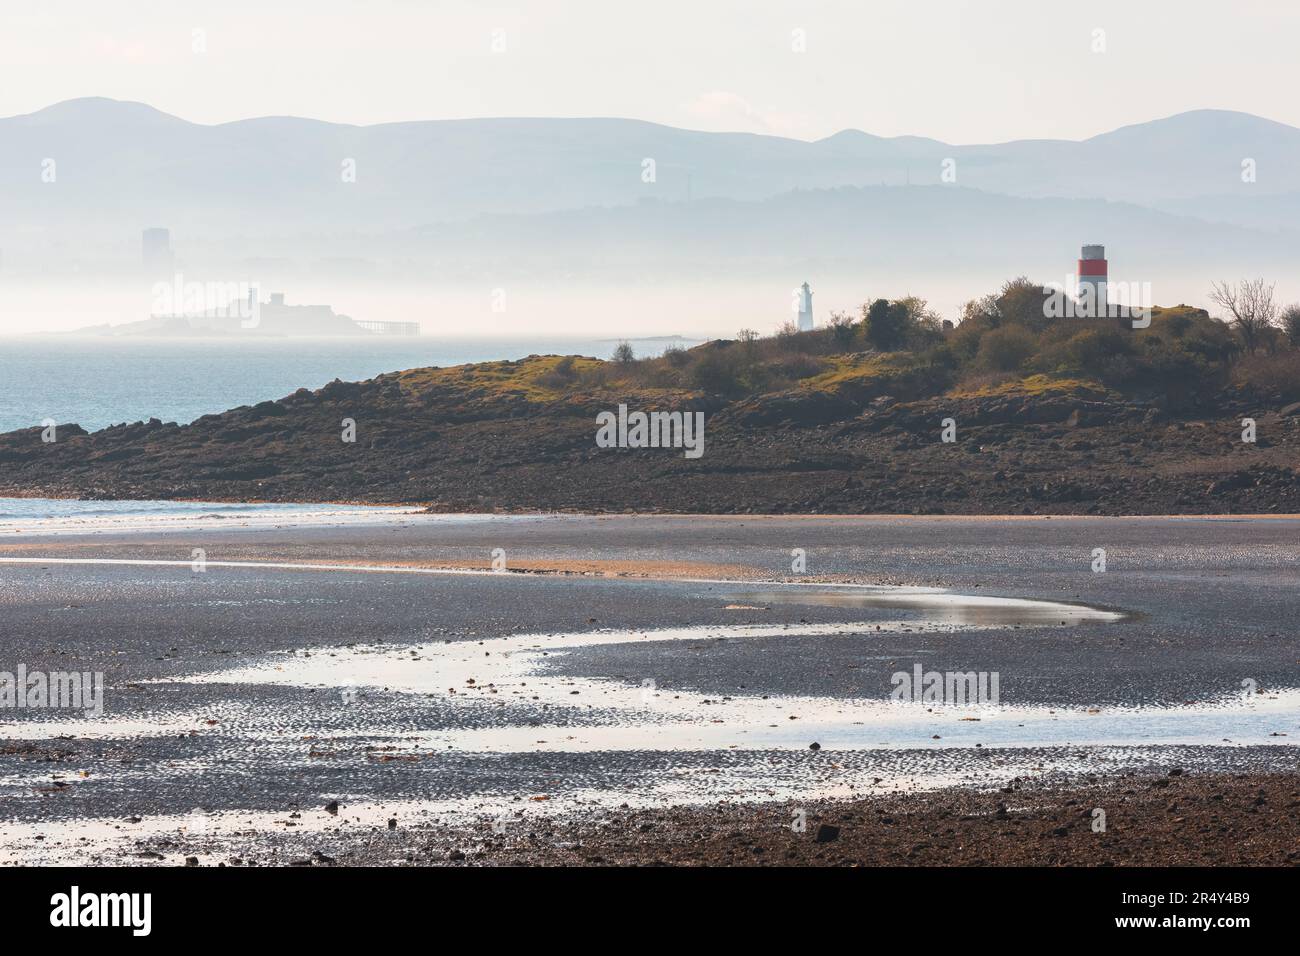 Moody, misty view at low tide from Silversands Beach in Aberdour, Fife, UK across the Firth of Forth to Edinburgh, and the Pentland Hills in Scotland. Stock Photo